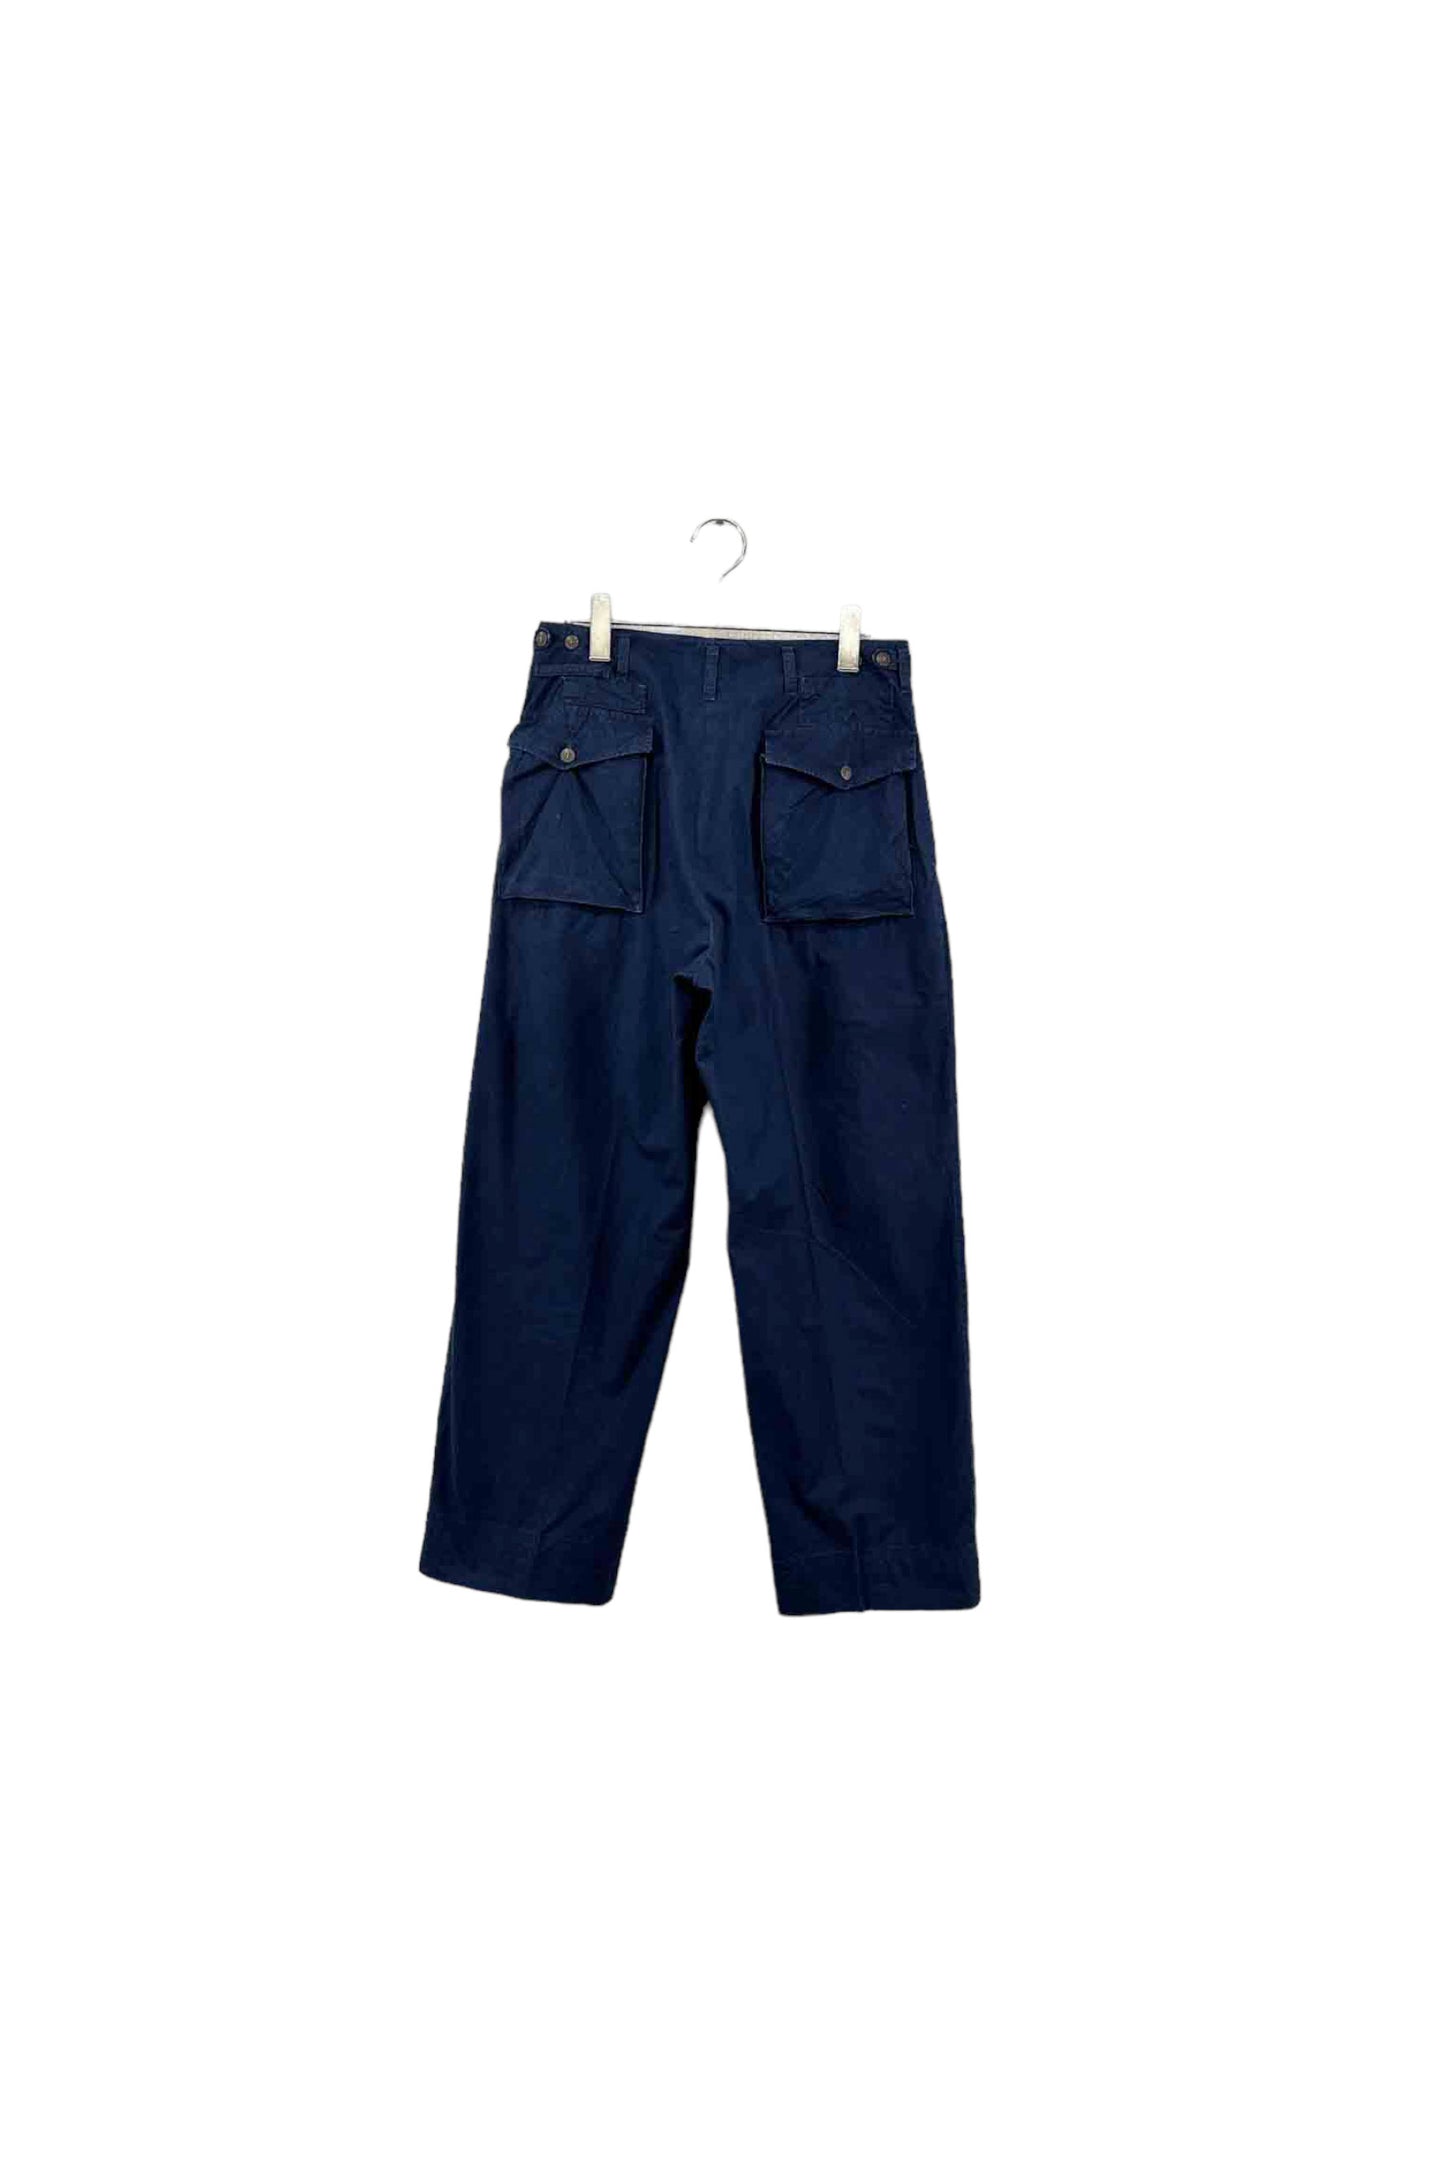 Made in USA POLO RALPH LAUREN blue pants